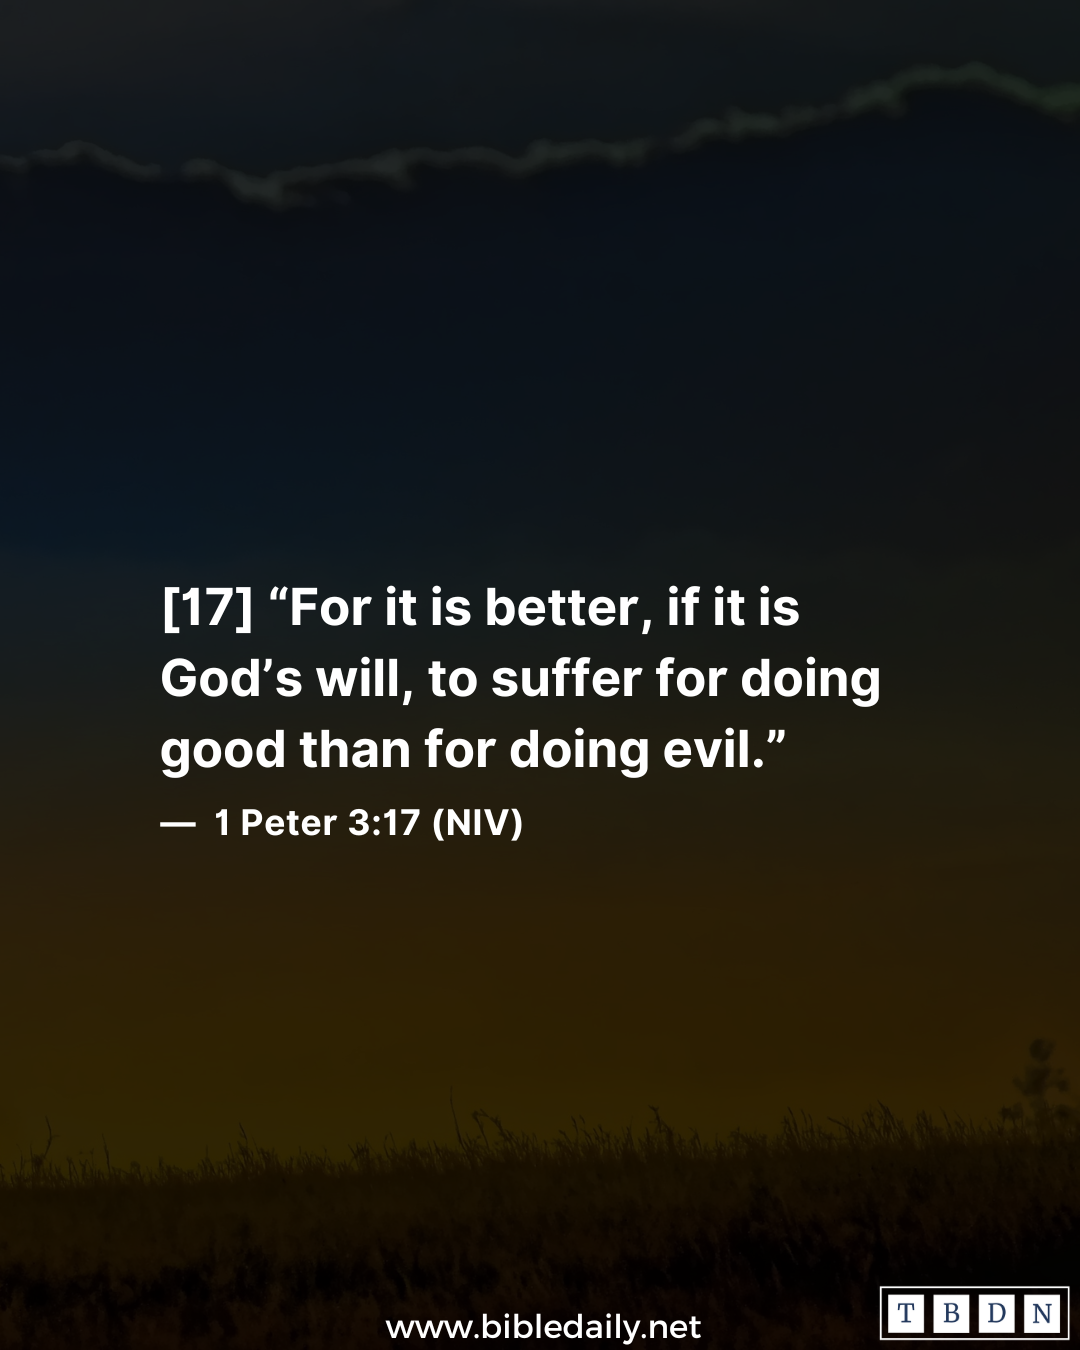 Devotional - It Is Better To Suffer for Doing Good